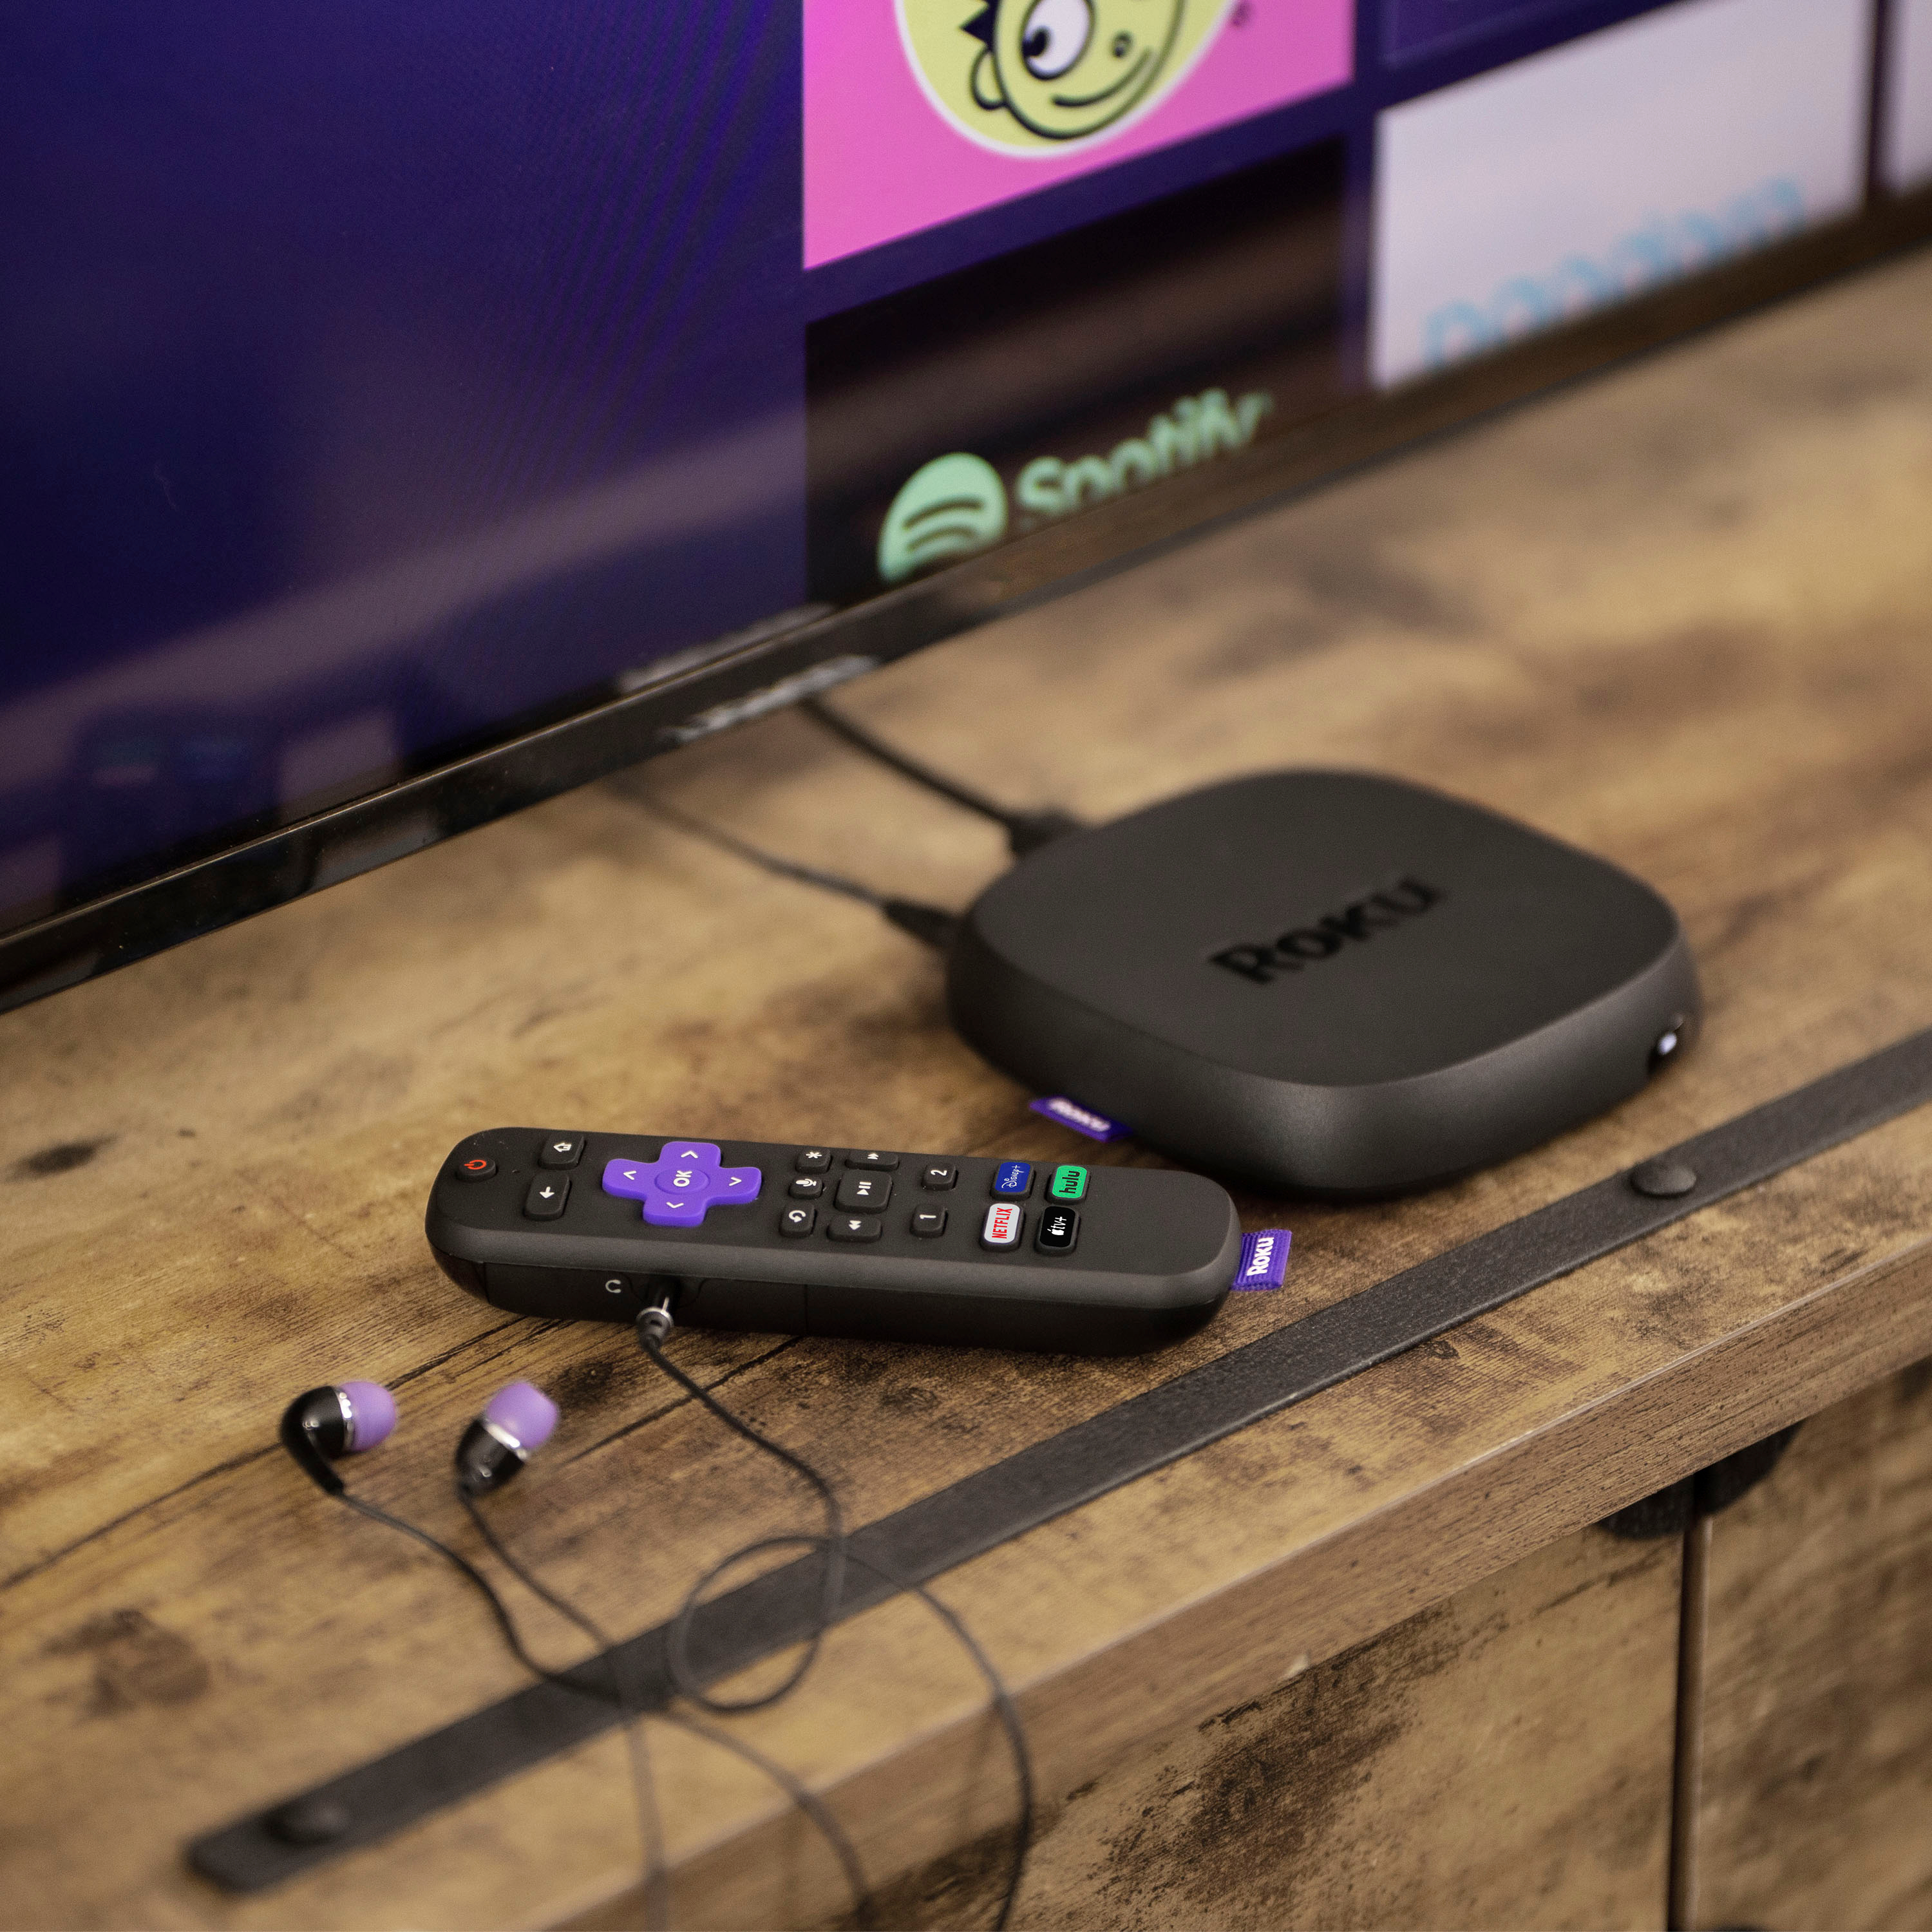 Roku Streaming Stick+ 4K Headphone Edition with Voice  - Best Buy